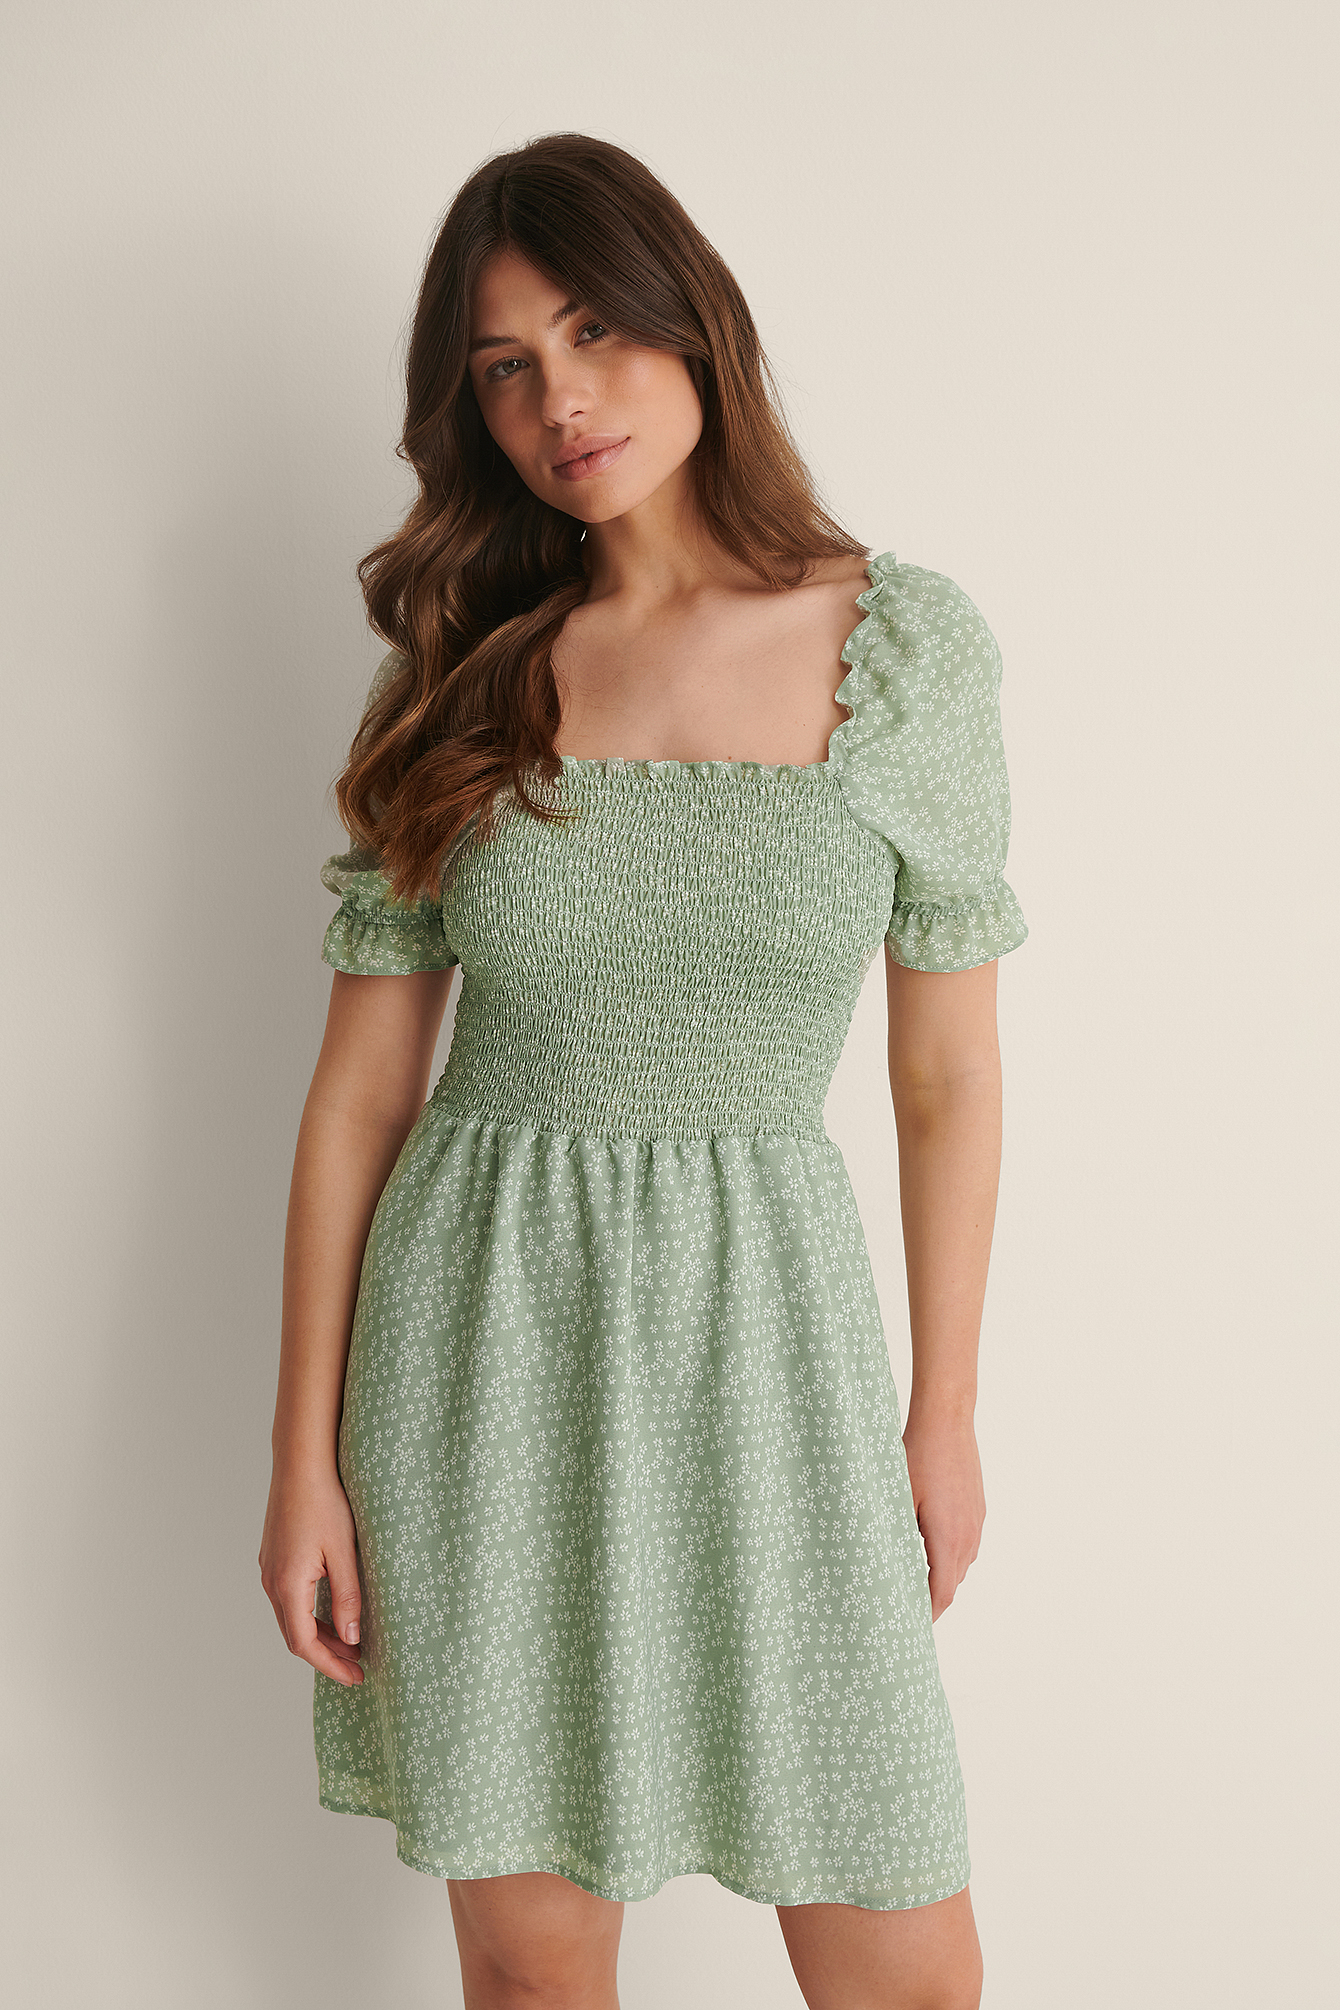 Dusty Green White Floral Printed Smock Dress